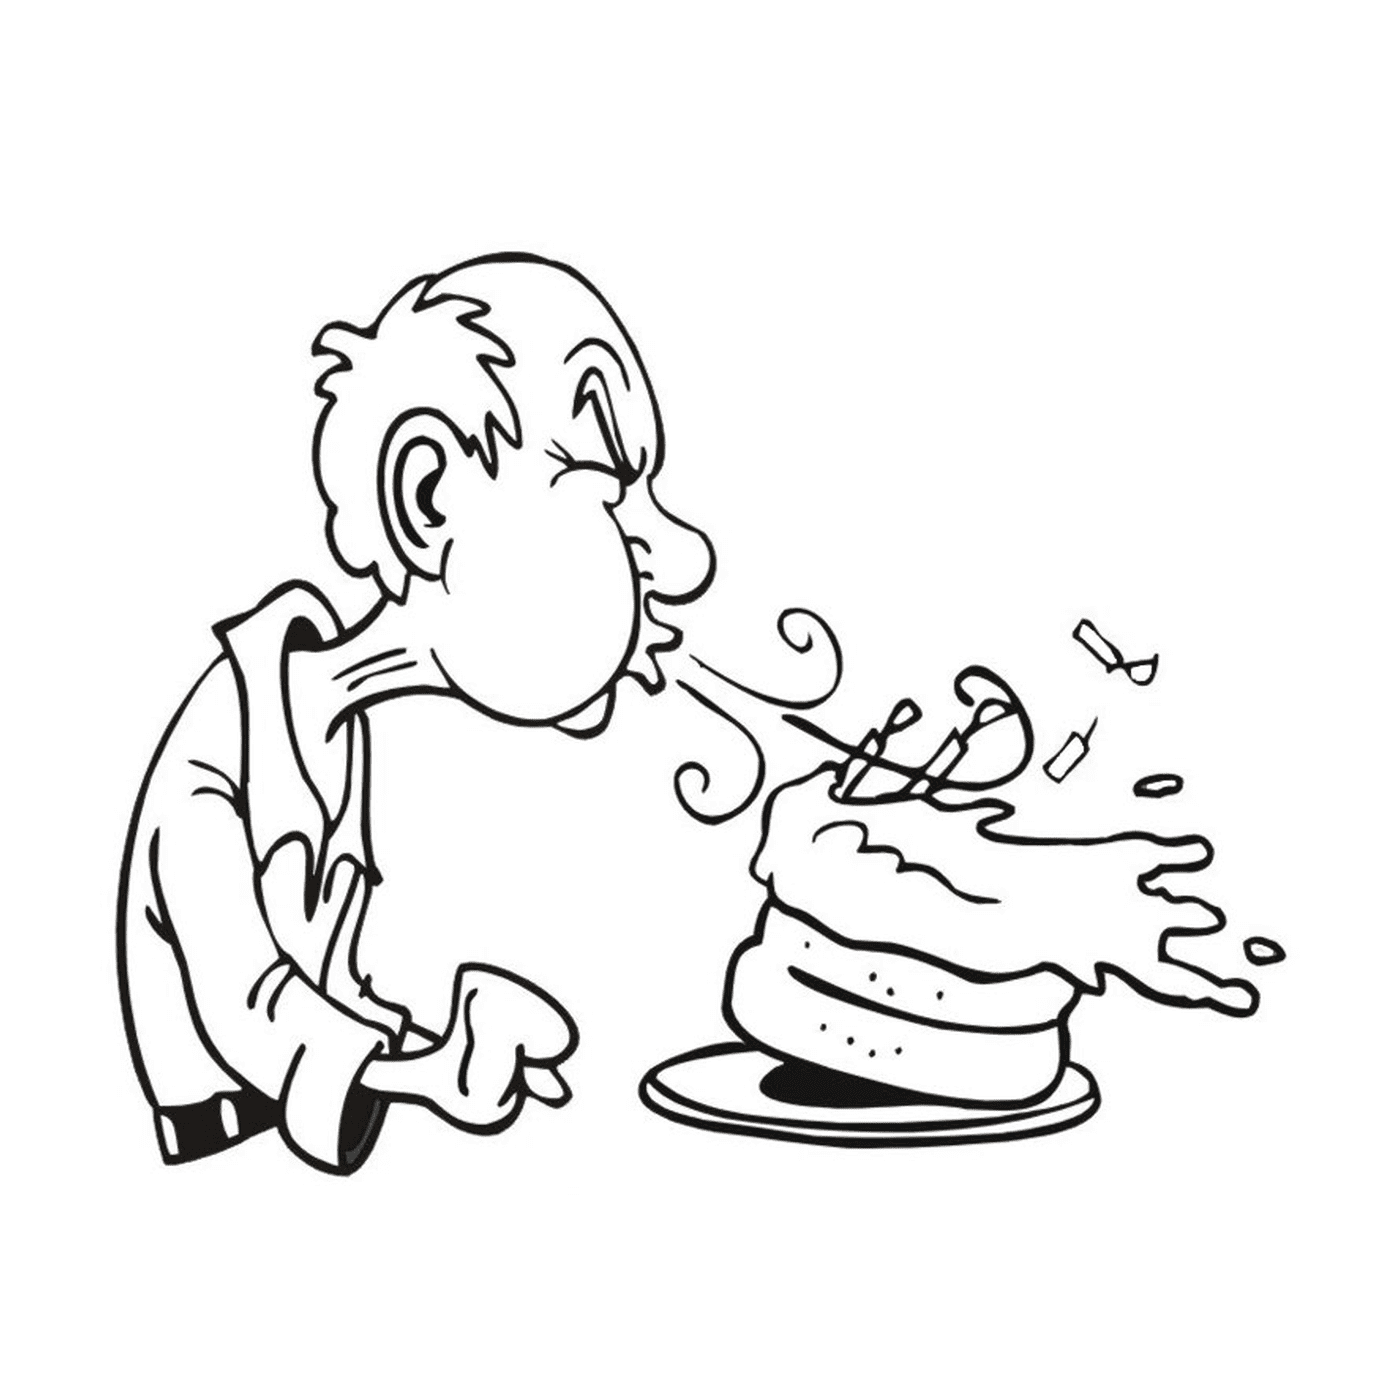  a man blowing a candle on a cake 